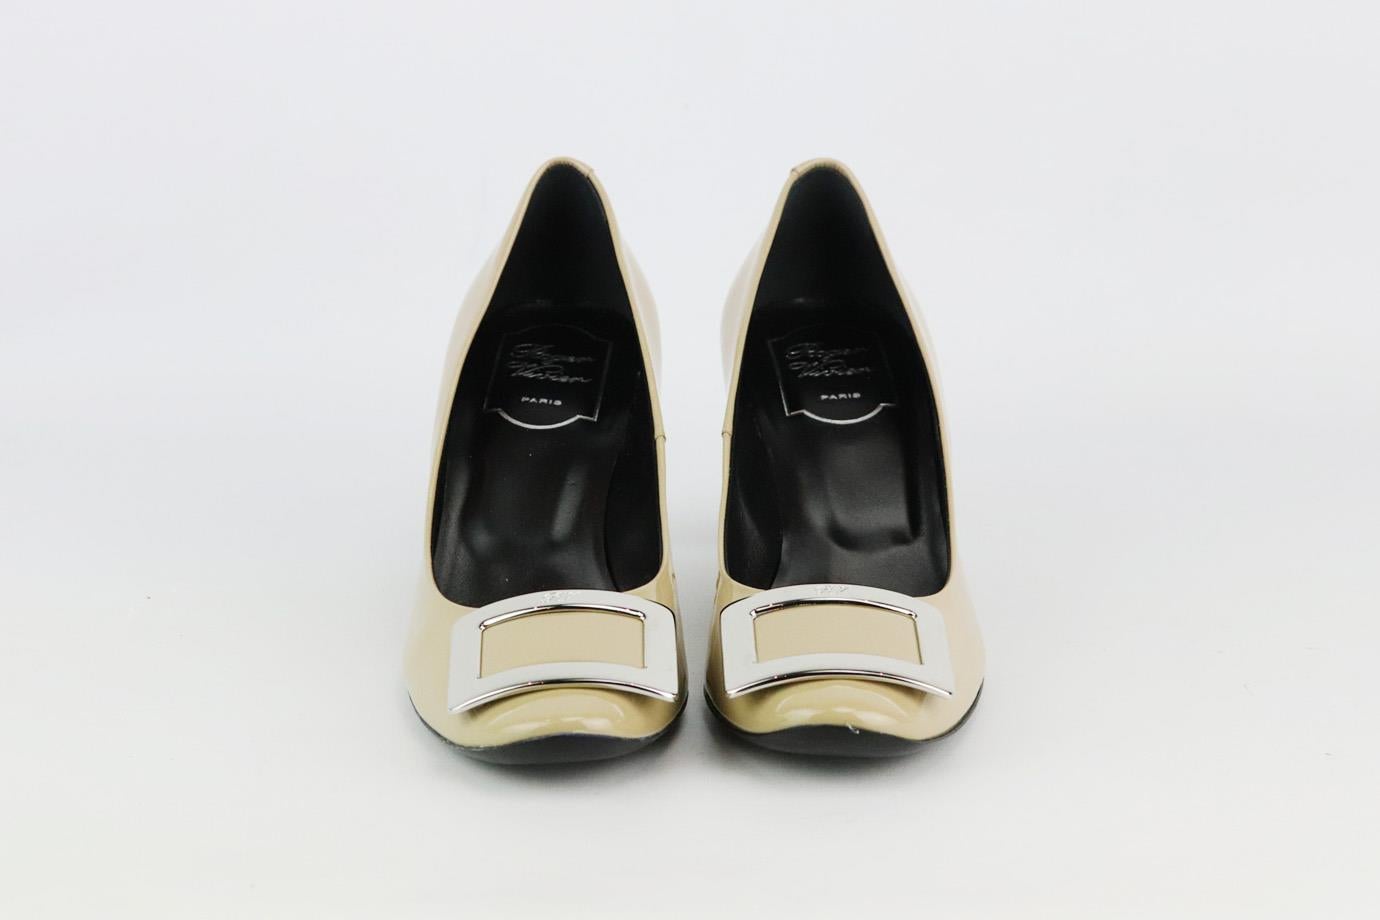 These pumps by Roger Vivier are an elegant re-creation of the founder's original 1965 design, they're made from beige patent-leather and embellished with a silver-tone signature buckle that tops the rounded toe. Heel measures approximately 50 mm/ 2